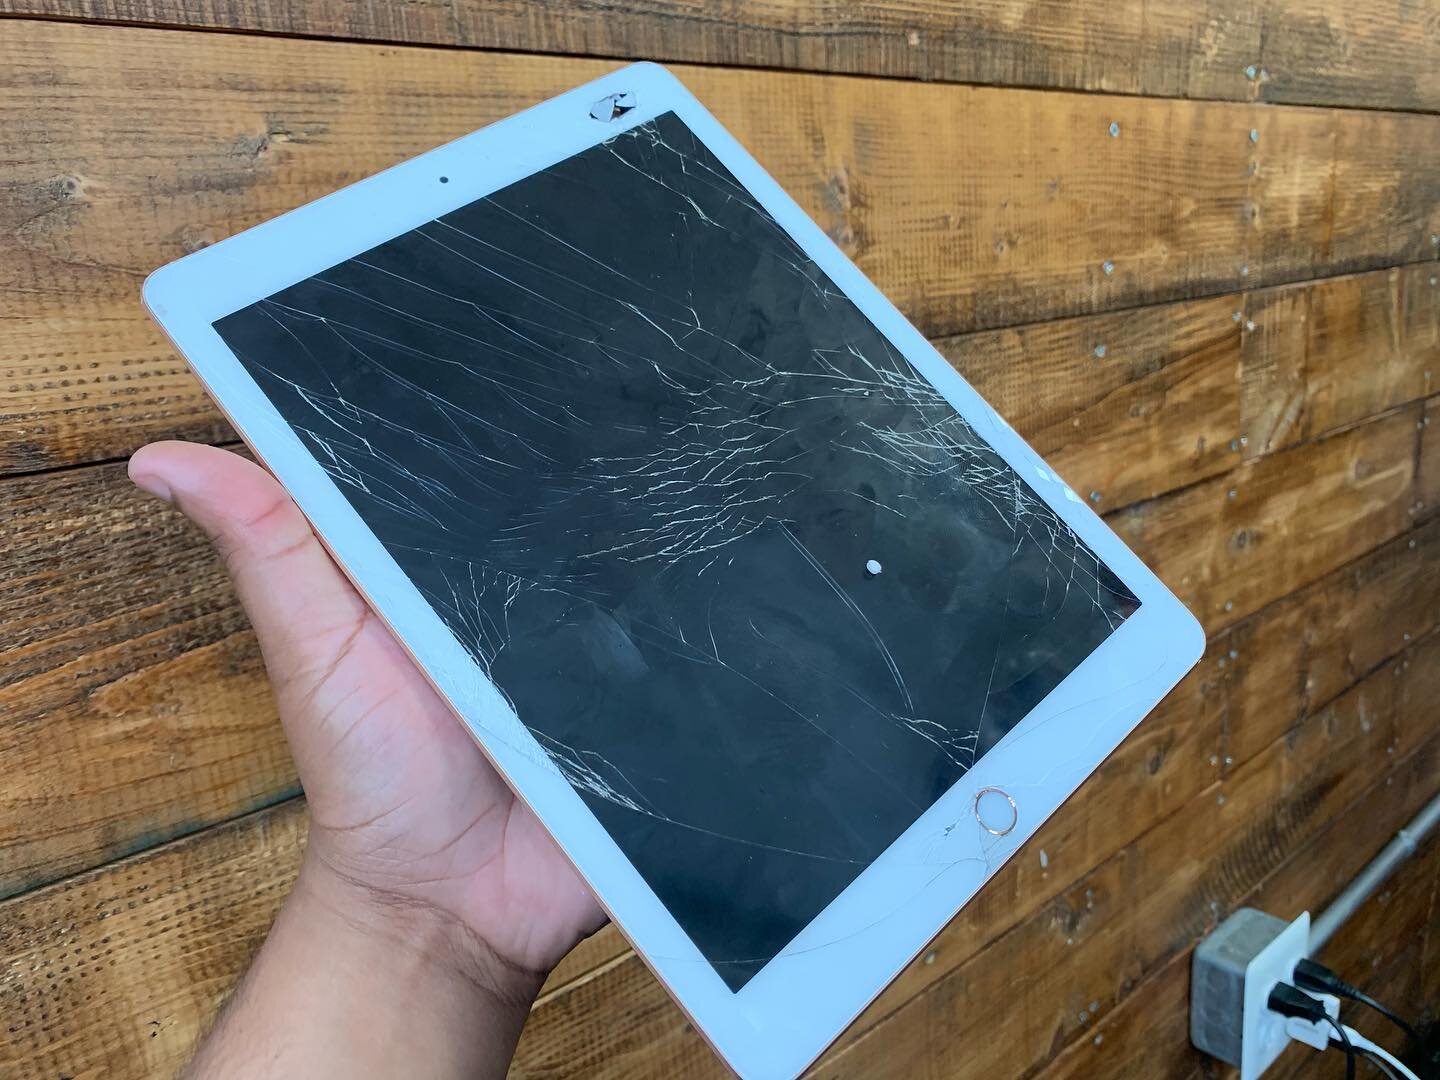 iPad 7 Screen Repair and a Tempered Glass Protector for Dee. We Treat your Electronics like our own and our Work, Reviews, and Pictures Prove it. 📲Call, Text, or slide in our DMs to schedule an appointment. You have our permission.⭐️⭐️⭐️⭐️⭐️⠀⠀⠀⠀⠀⠀⠀⠀